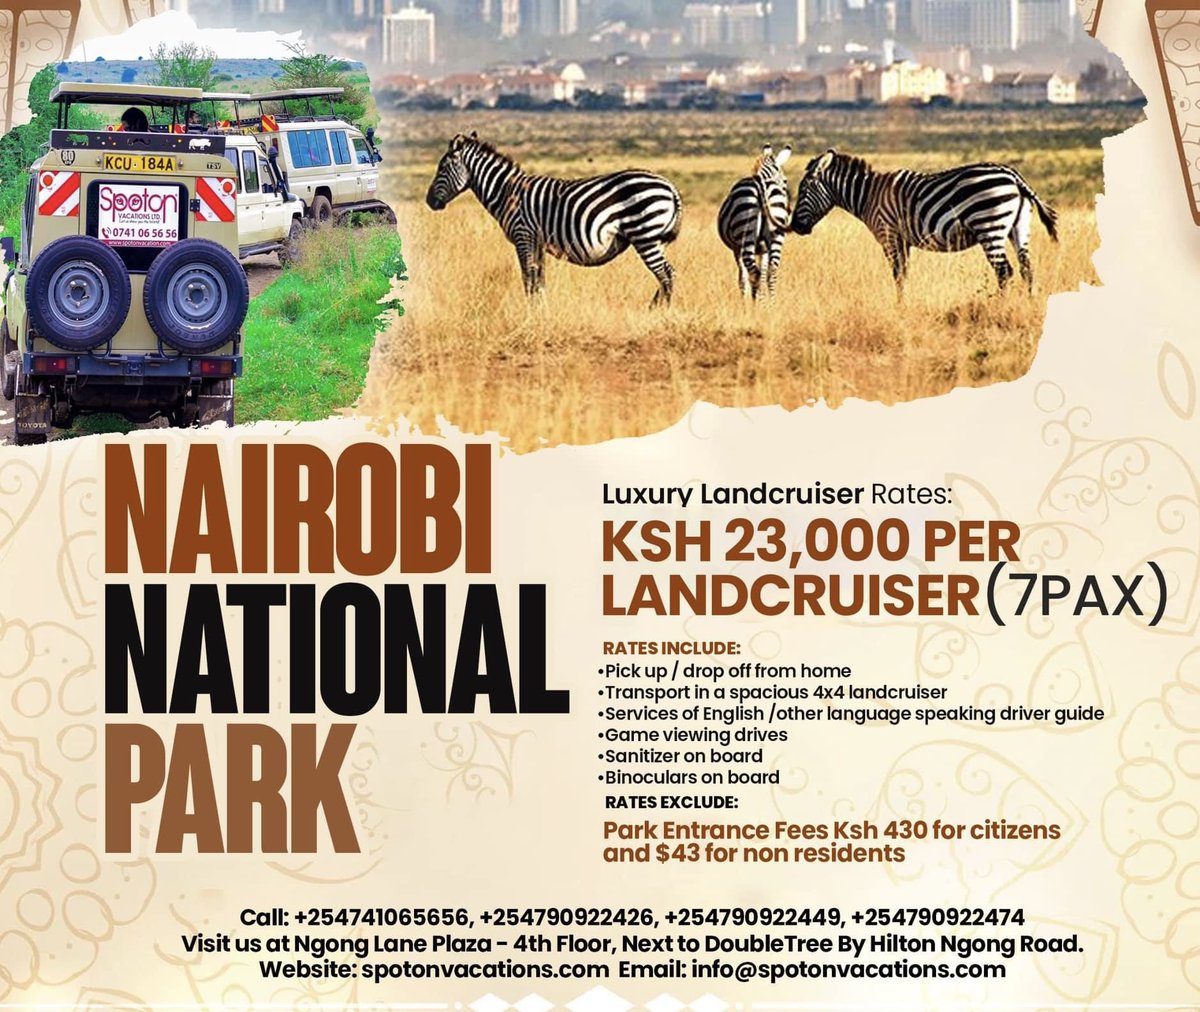 FRIDAY IS A HOLIDAY... let’s go and celebrate as we plant trees as well as enjoy Nairobi National Park Luxury Safari Experience 😘😘 Yeey ... 🦁🦏🐆🐃🦒... Take your family on a break to enjoy a luxury safari at the only park in the world within a city at affordable rates.